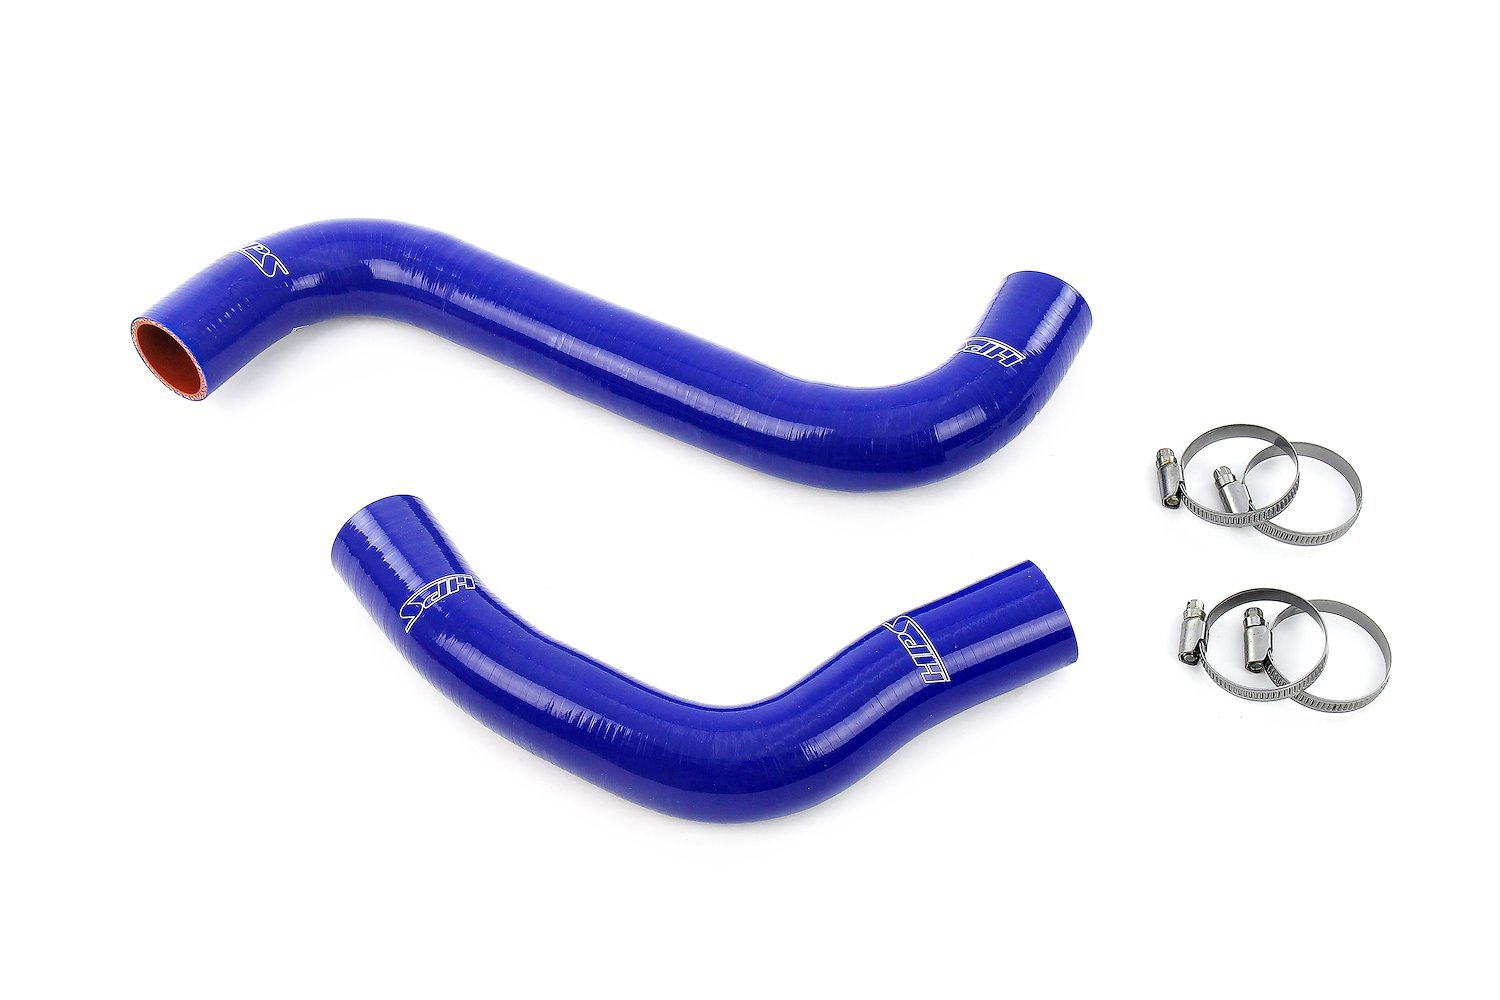 57-2107-BLUE Radiator Hose Kit, 3-Ply Reinforced Silicone, Replaces Rubber Radiator Coolant Hoses